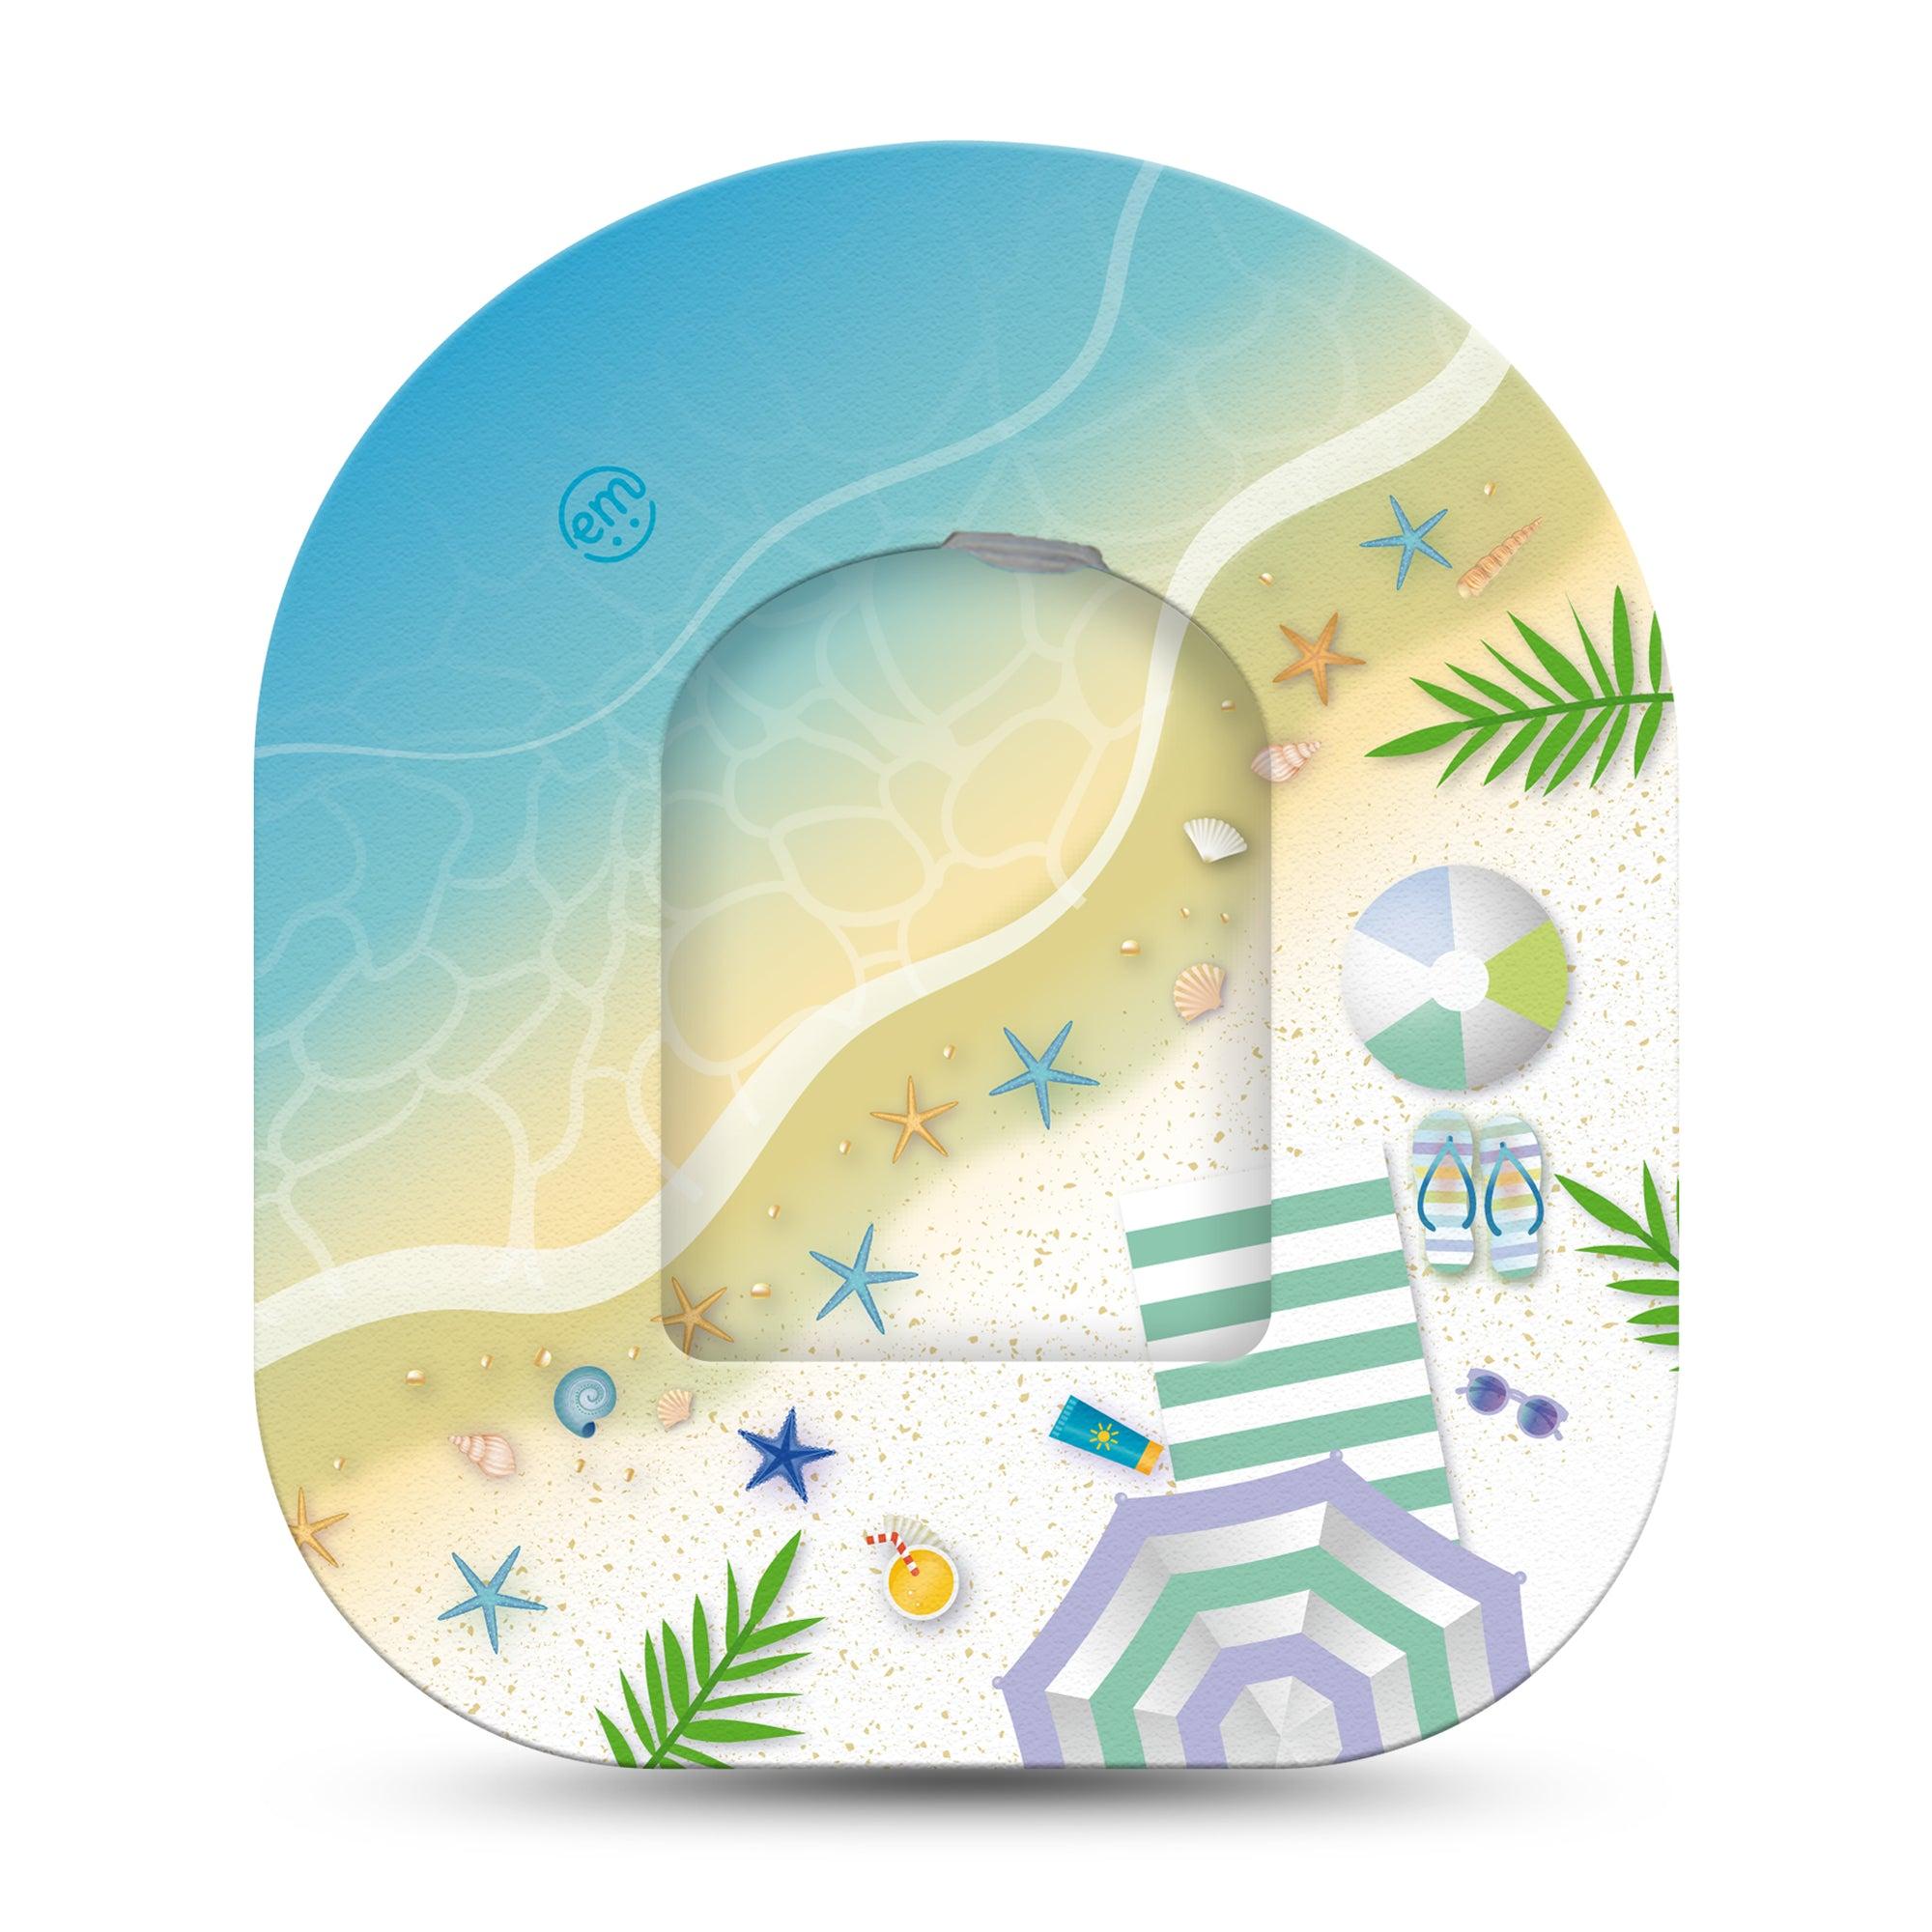 ExpressionMed Relaxing Beach Pod Sticker, Single Sticker Only, Sandy Beach Shore Design Theme Vinyl Sticker for Pod Device with Matching Overlay Adhesive Patch